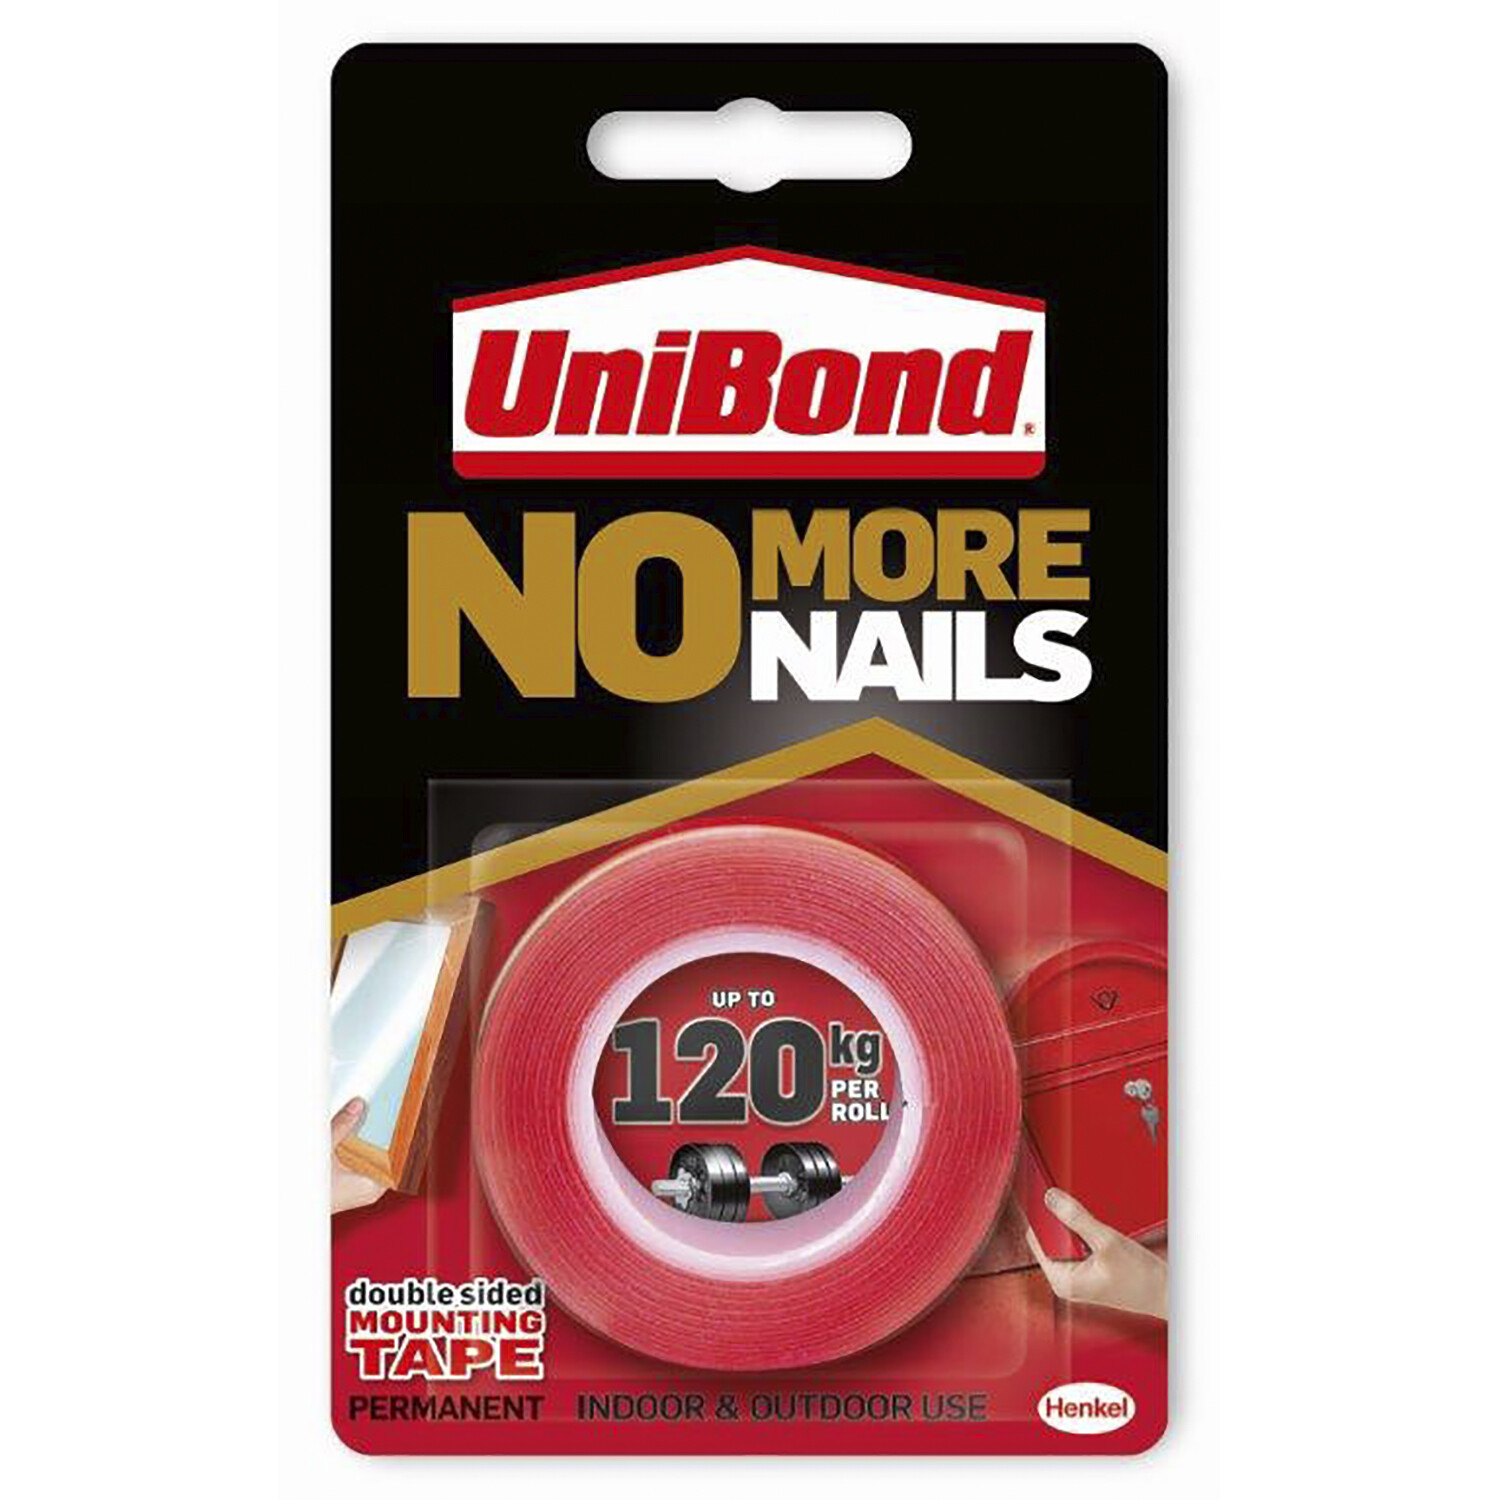 UniBond No More Nails Mounting Tape Roll Image